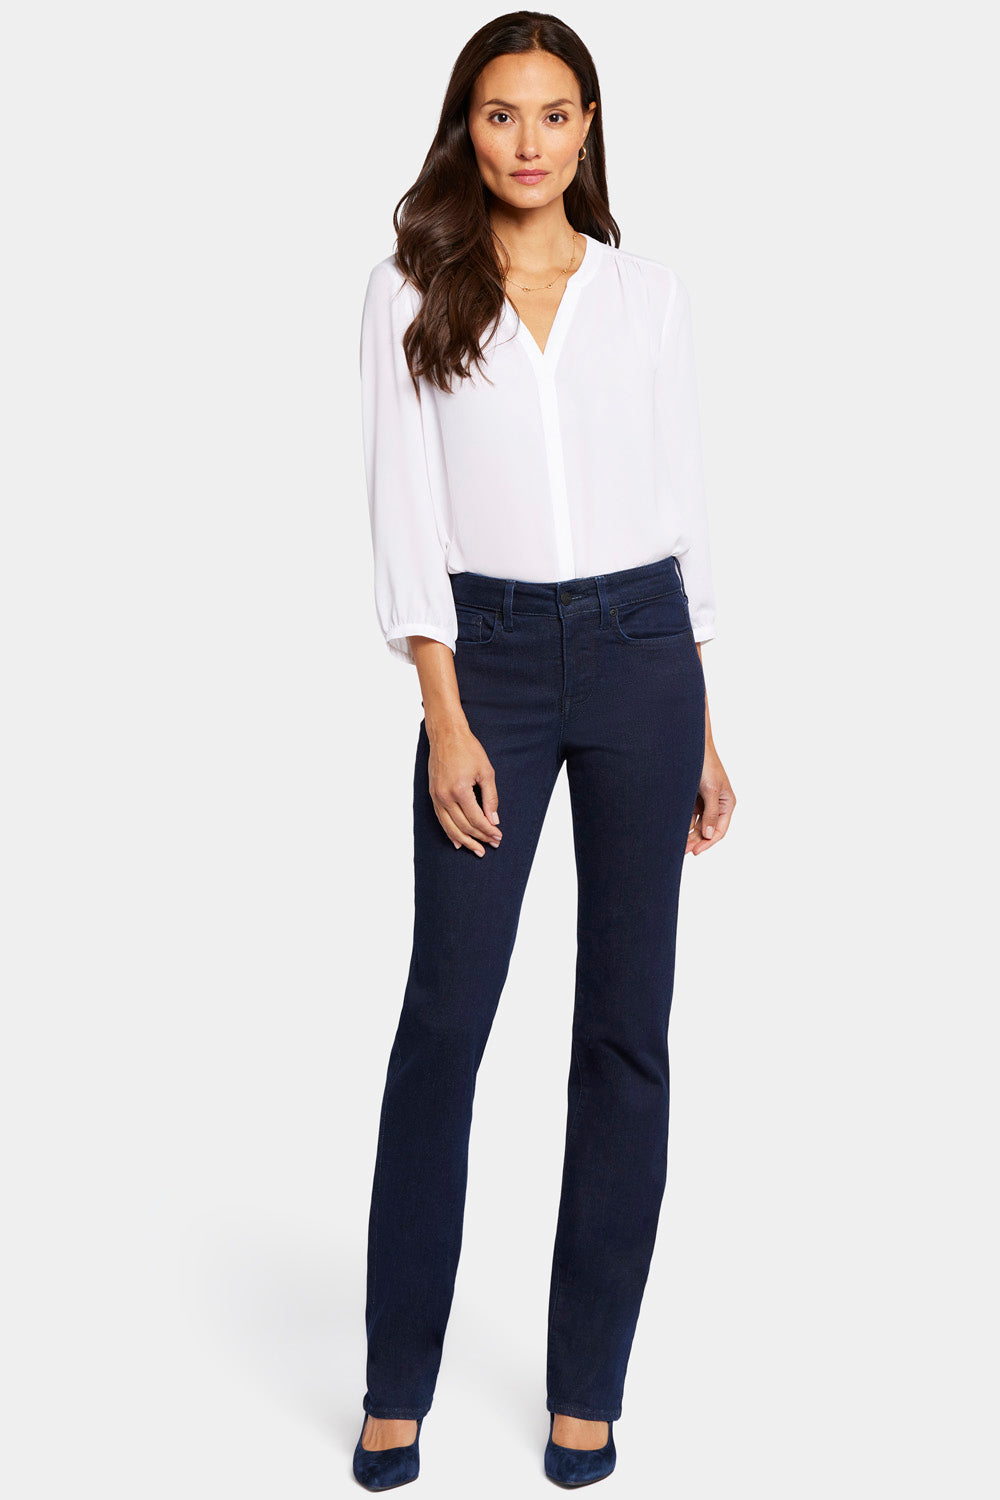 Marilyn Straight Jeans In Petite With Short 28